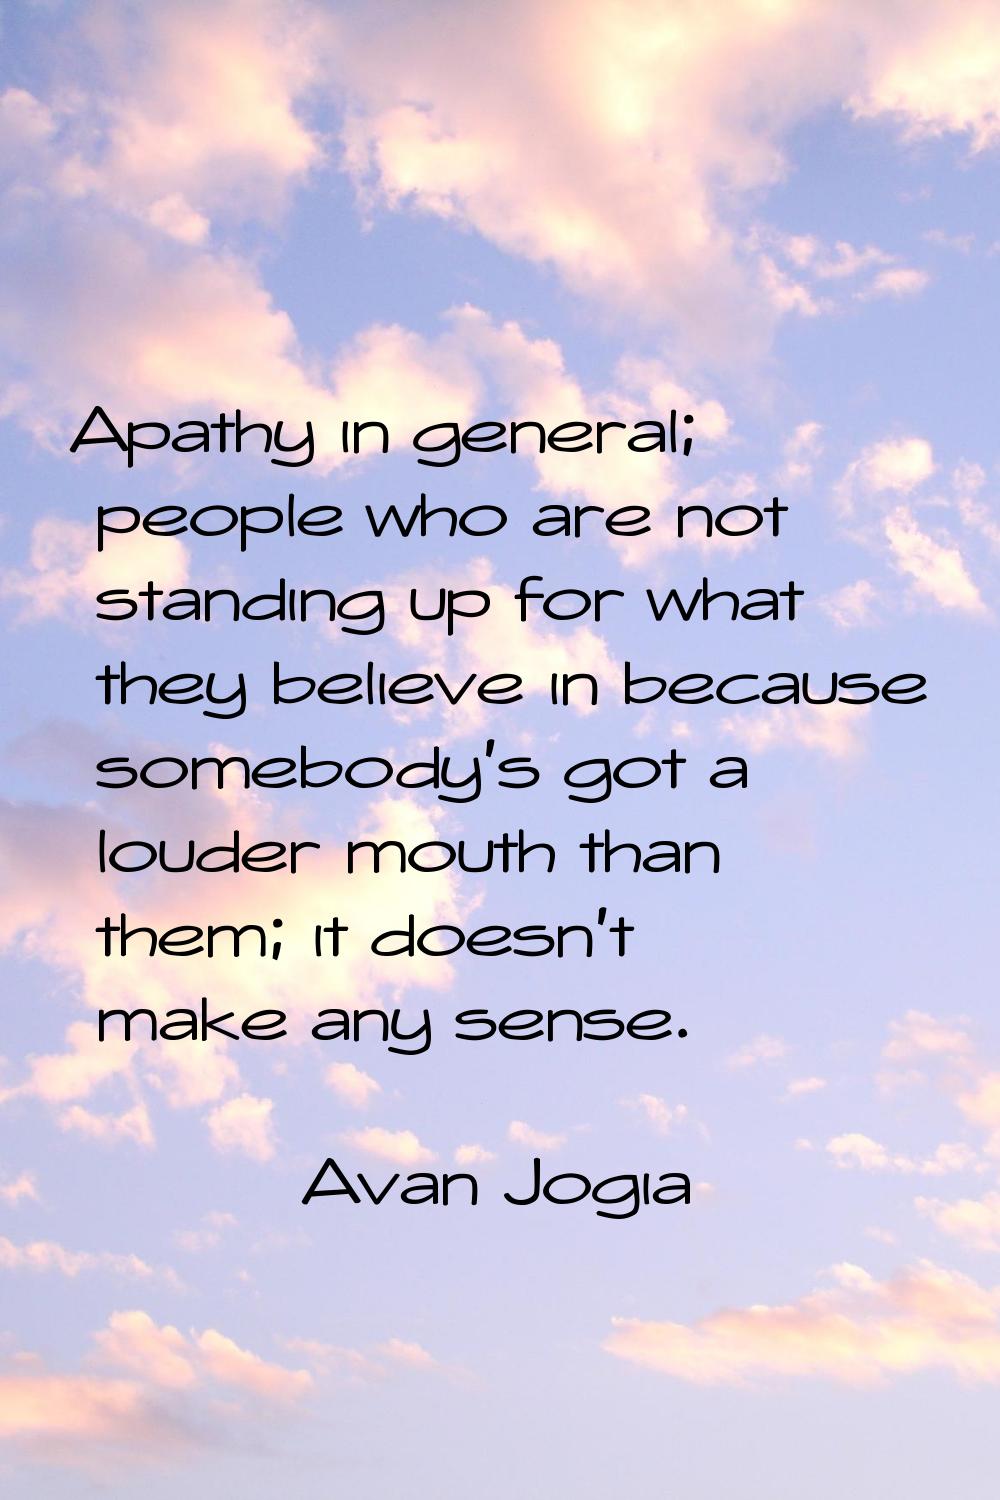 Apathy in general; people who are not standing up for what they believe in because somebody's got a